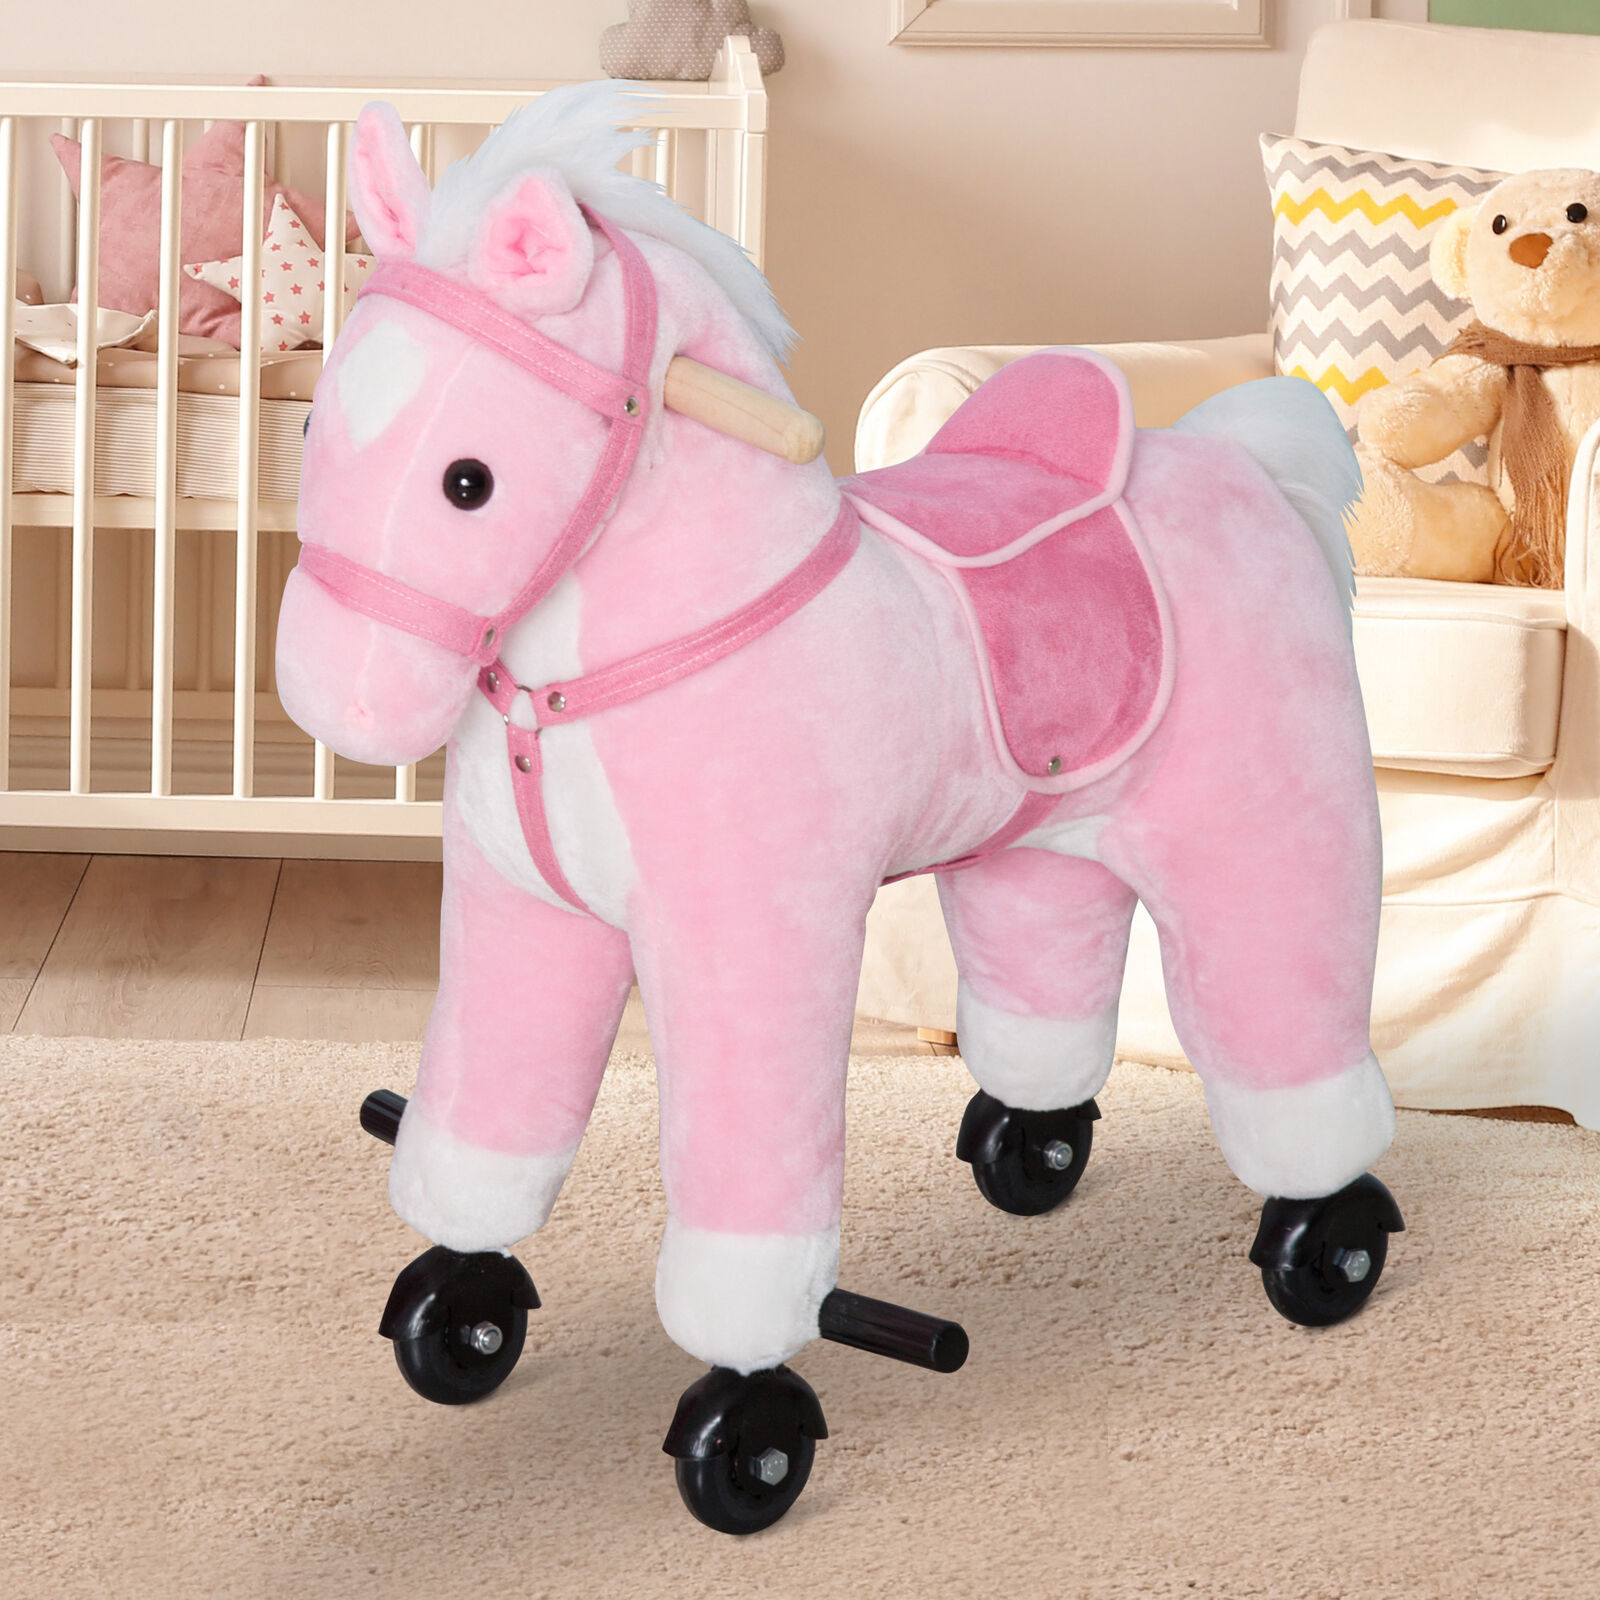 Kids Plush Toy Ride On Walking Horse Rolling Pony With 4 Wheels & Sound Pink